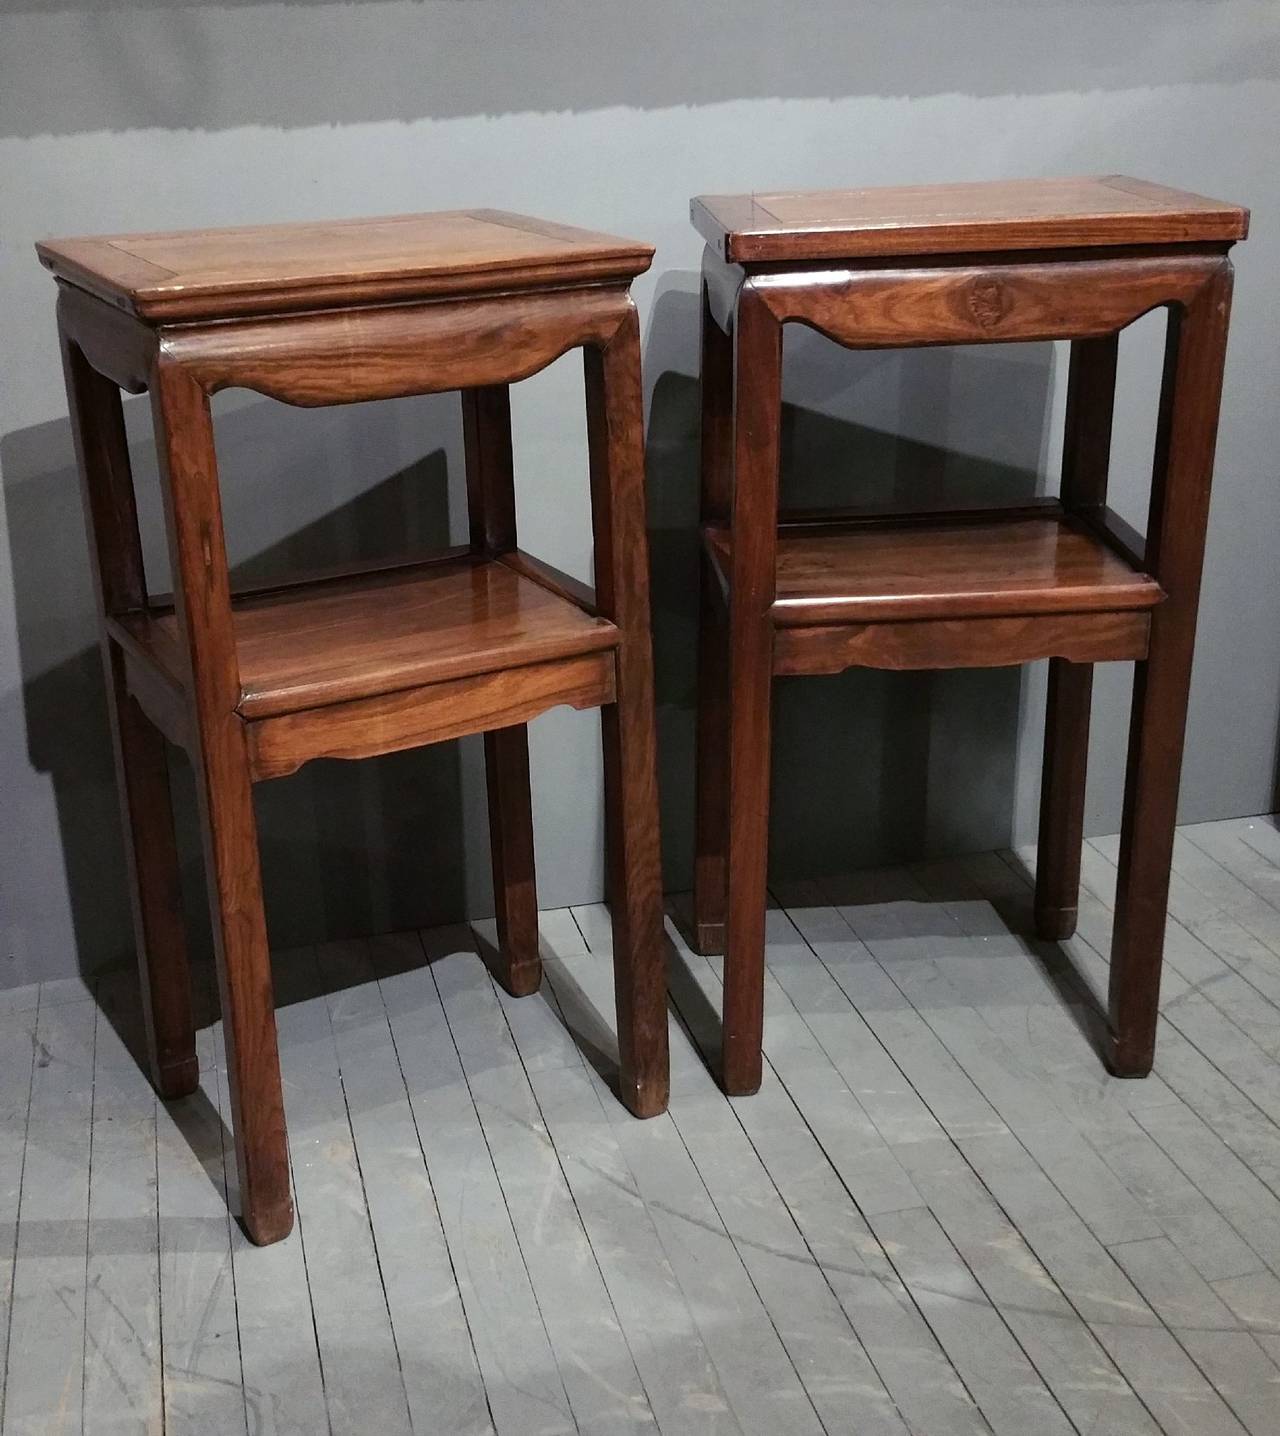 This simple but very appealing pair of Chinese hardwood side tables features a single central shelf with a shaped apron that also runs around the top. The table tops have a cross banded border and the wood overall has a rich, warm patina. Each table